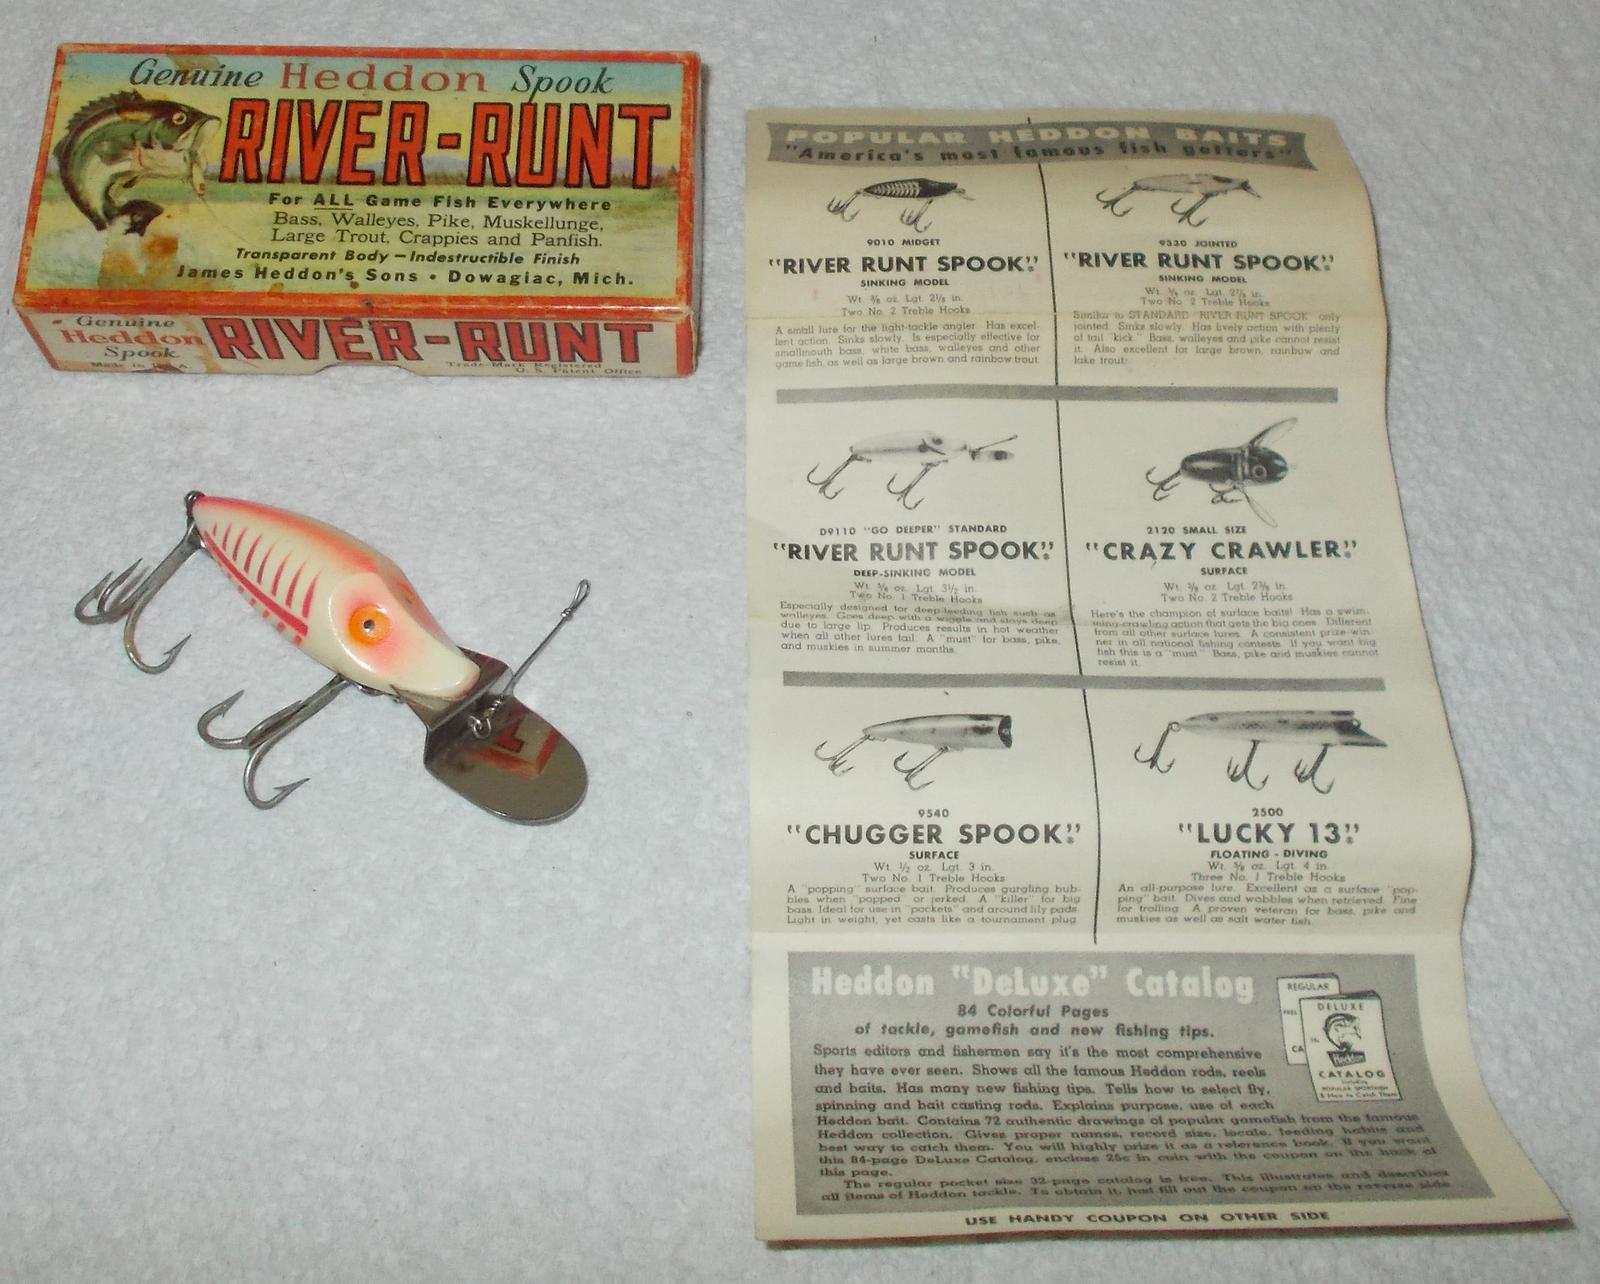 Sold at Auction: Vintage Heddon River Runt Spook Fishing Lure w